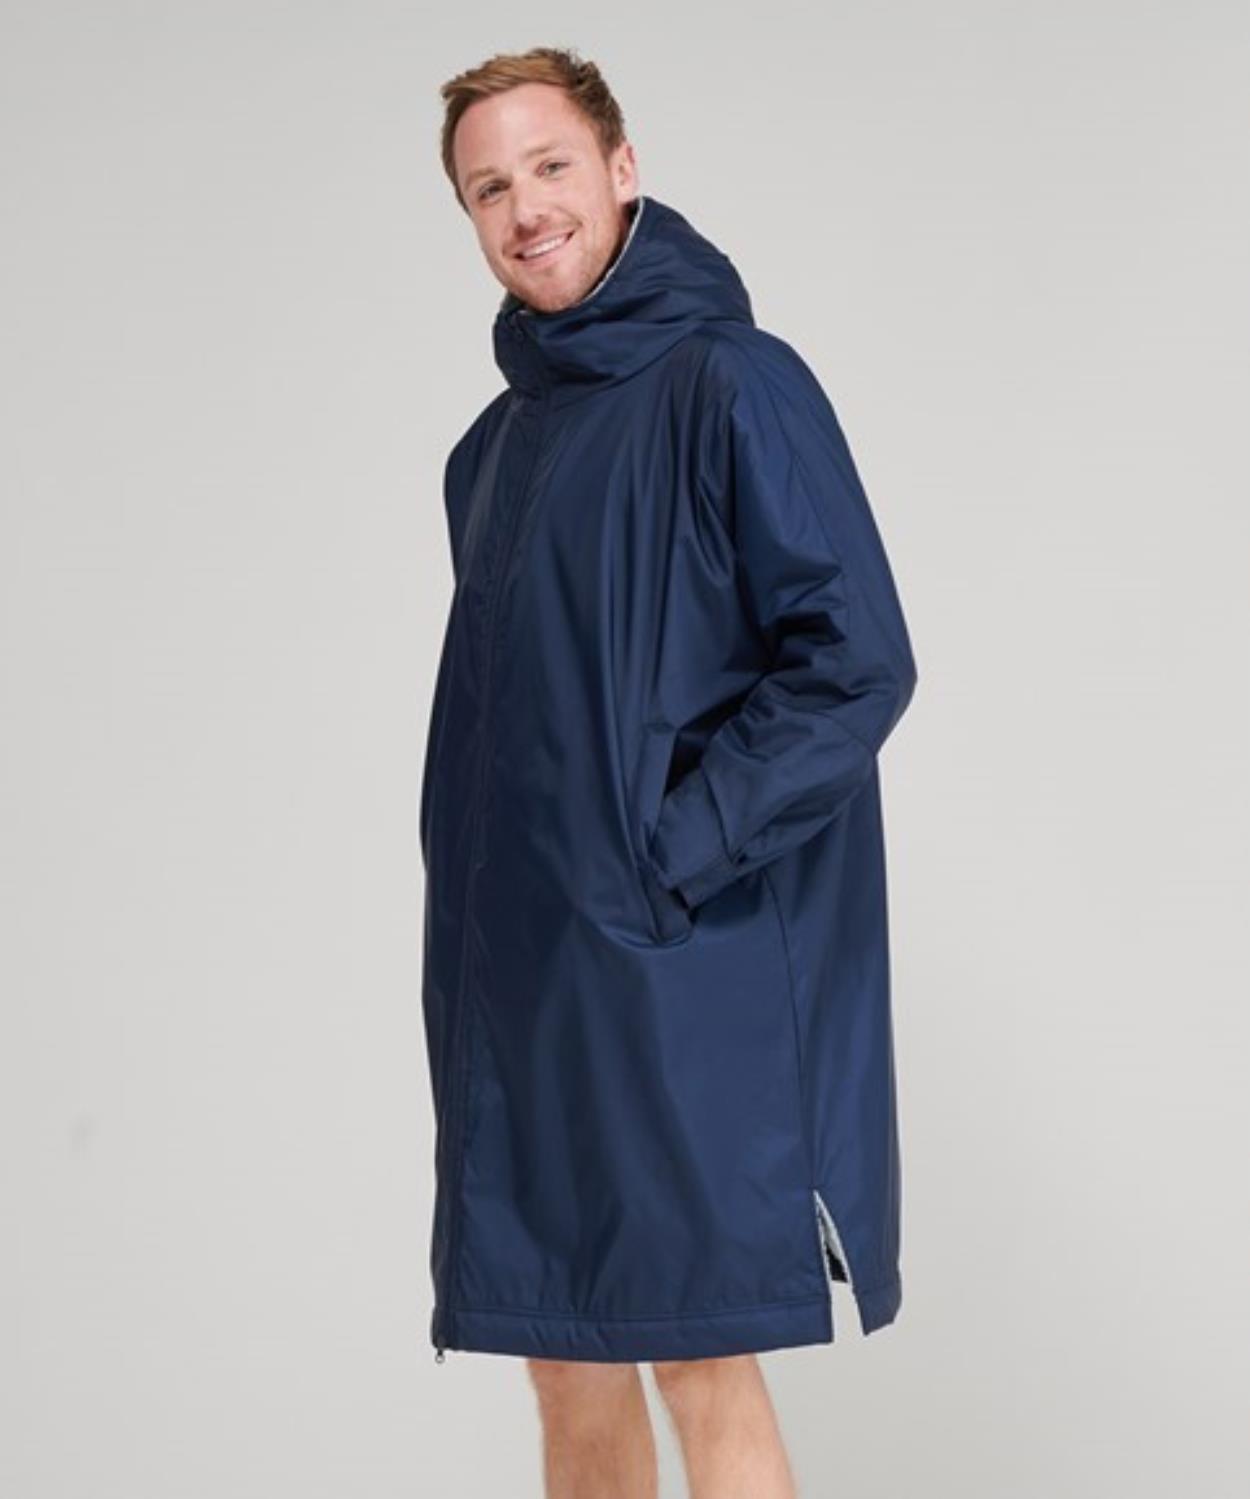 LV690 All Weather Robe Image 1